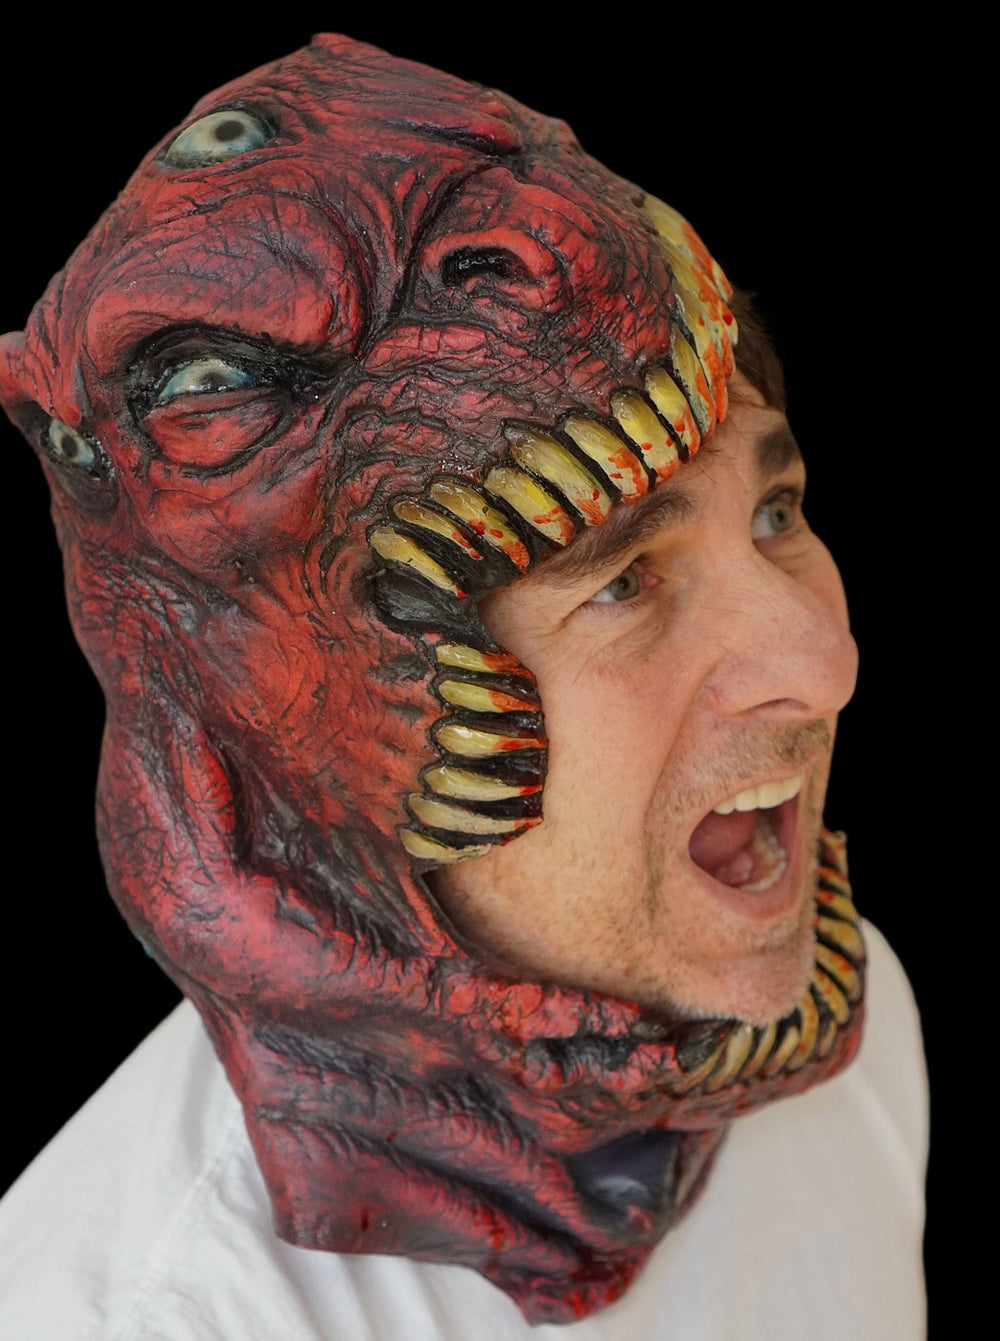 Large Full Over the Head Halloween Mask - The Head Chomper